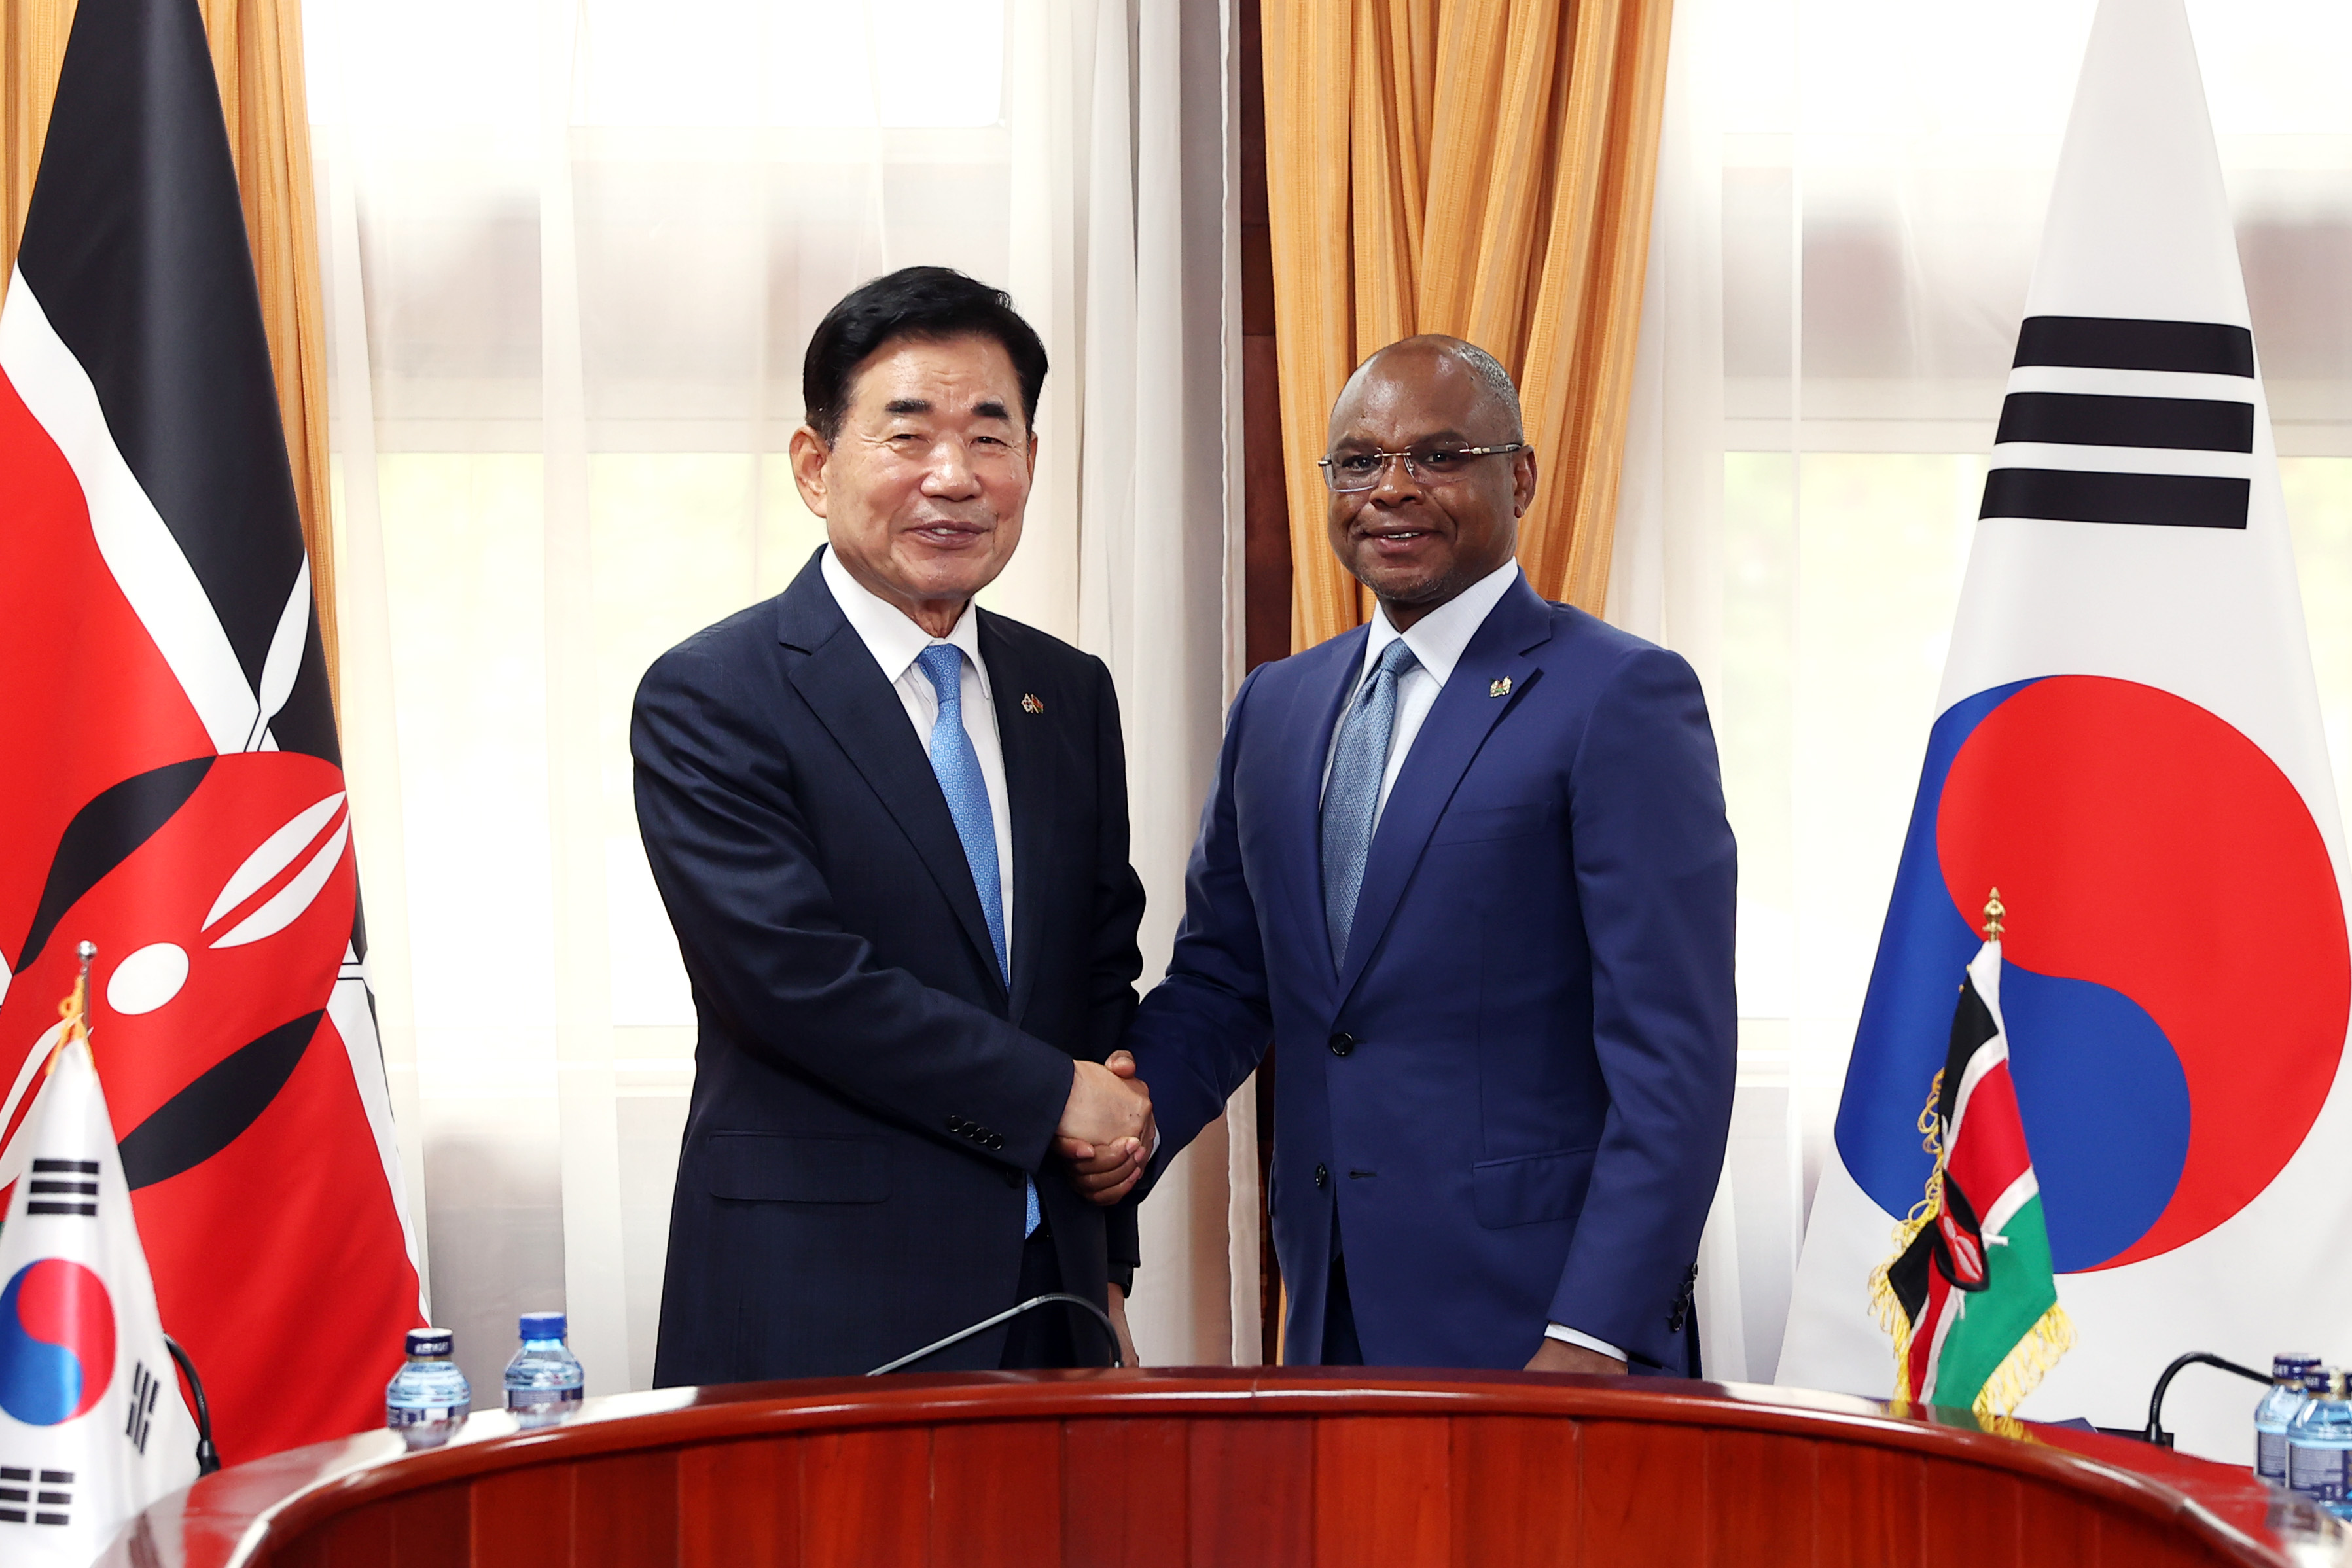 Speaker Kim Jin-pyo meets Kenyan President and Senate Speaker and attends the opening ceremony of 2030 High Level Conference on Korea-Africa Partnership (KOAFP) 관련사진 4 보기